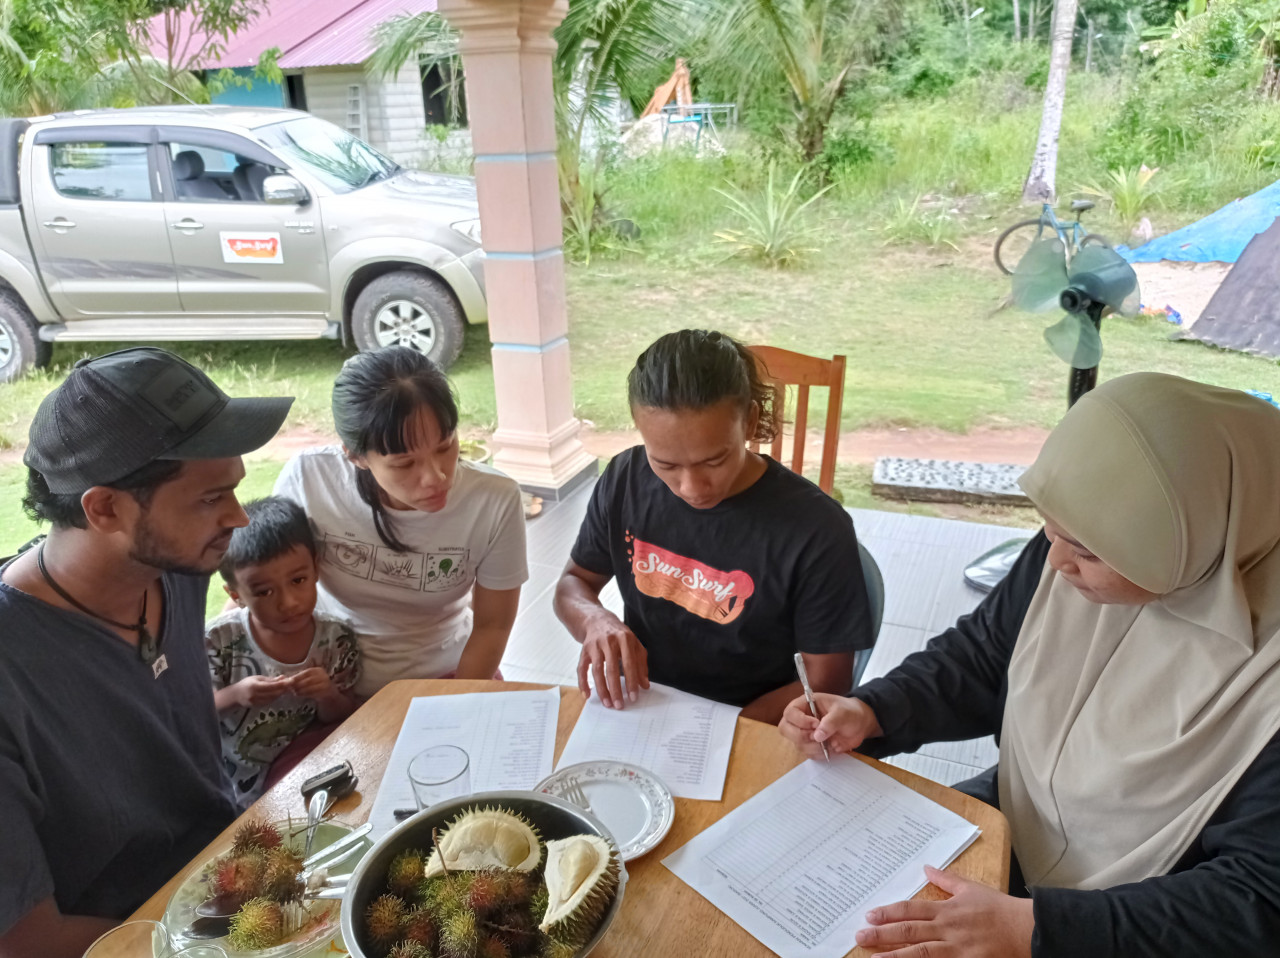 Alvin and his family take part in a breakfast discussion with locals. - Pic courtesy of TMCG